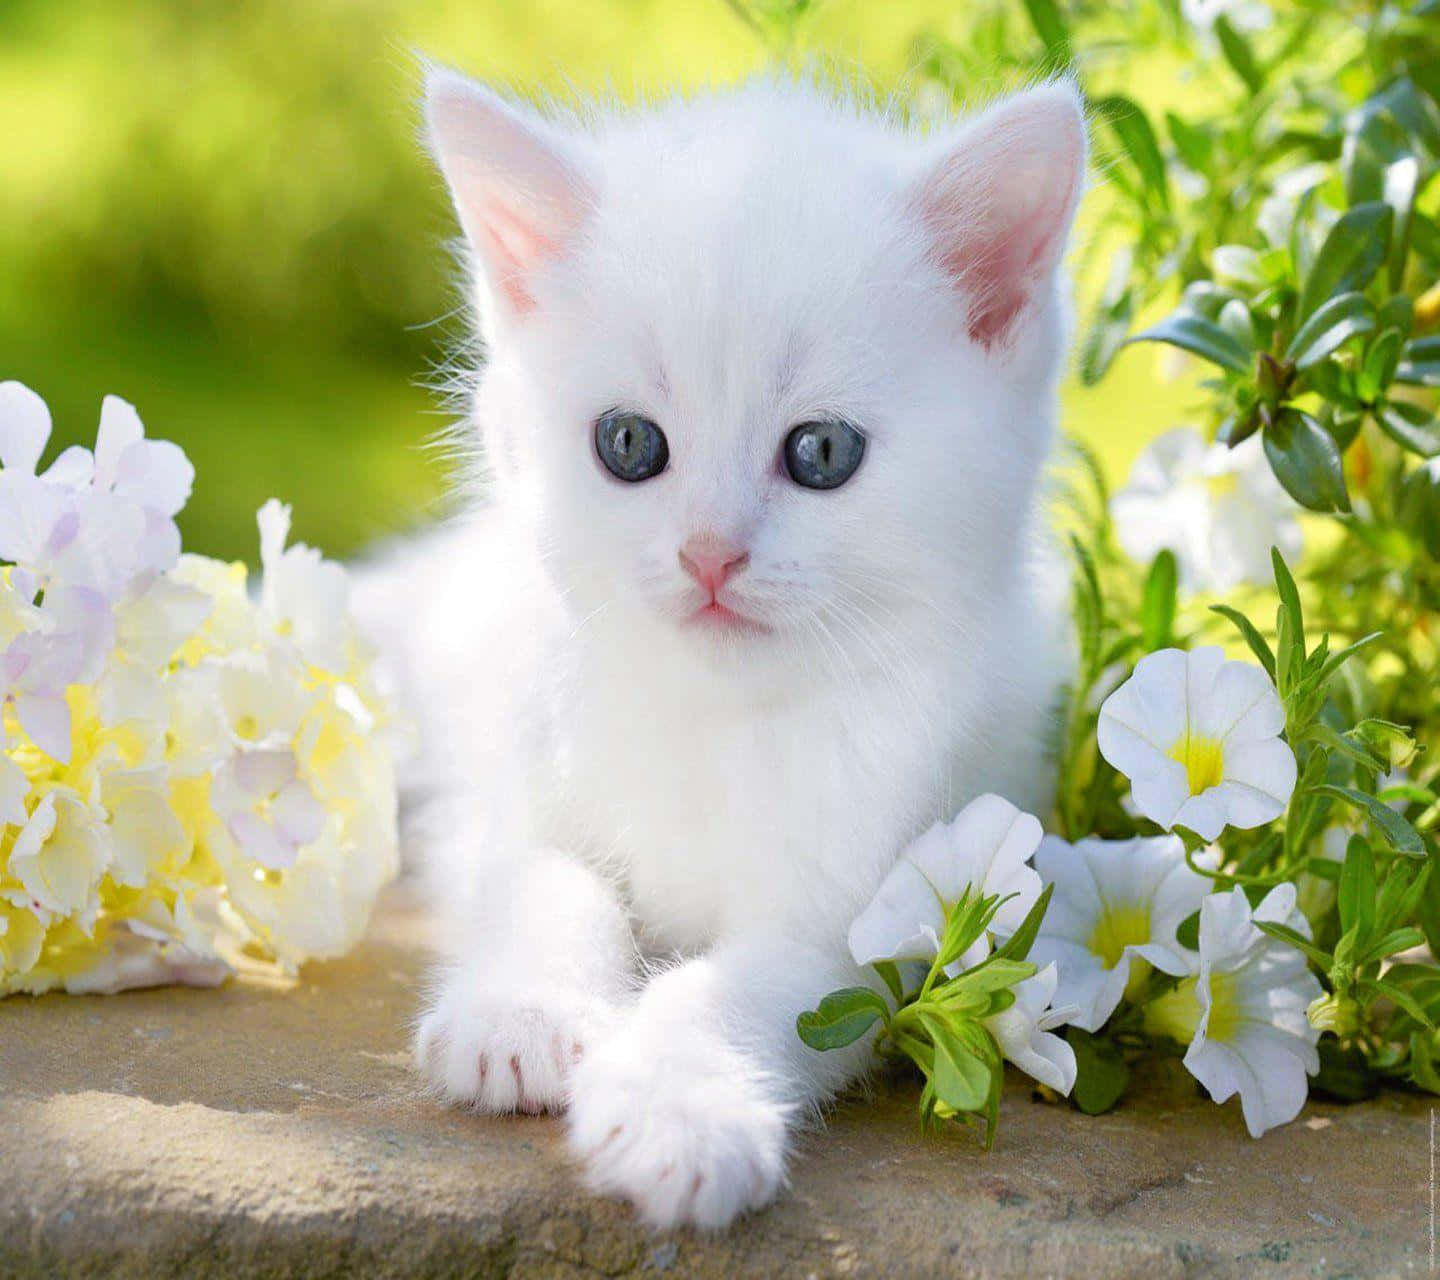 "Cute and adorable kitty cat"